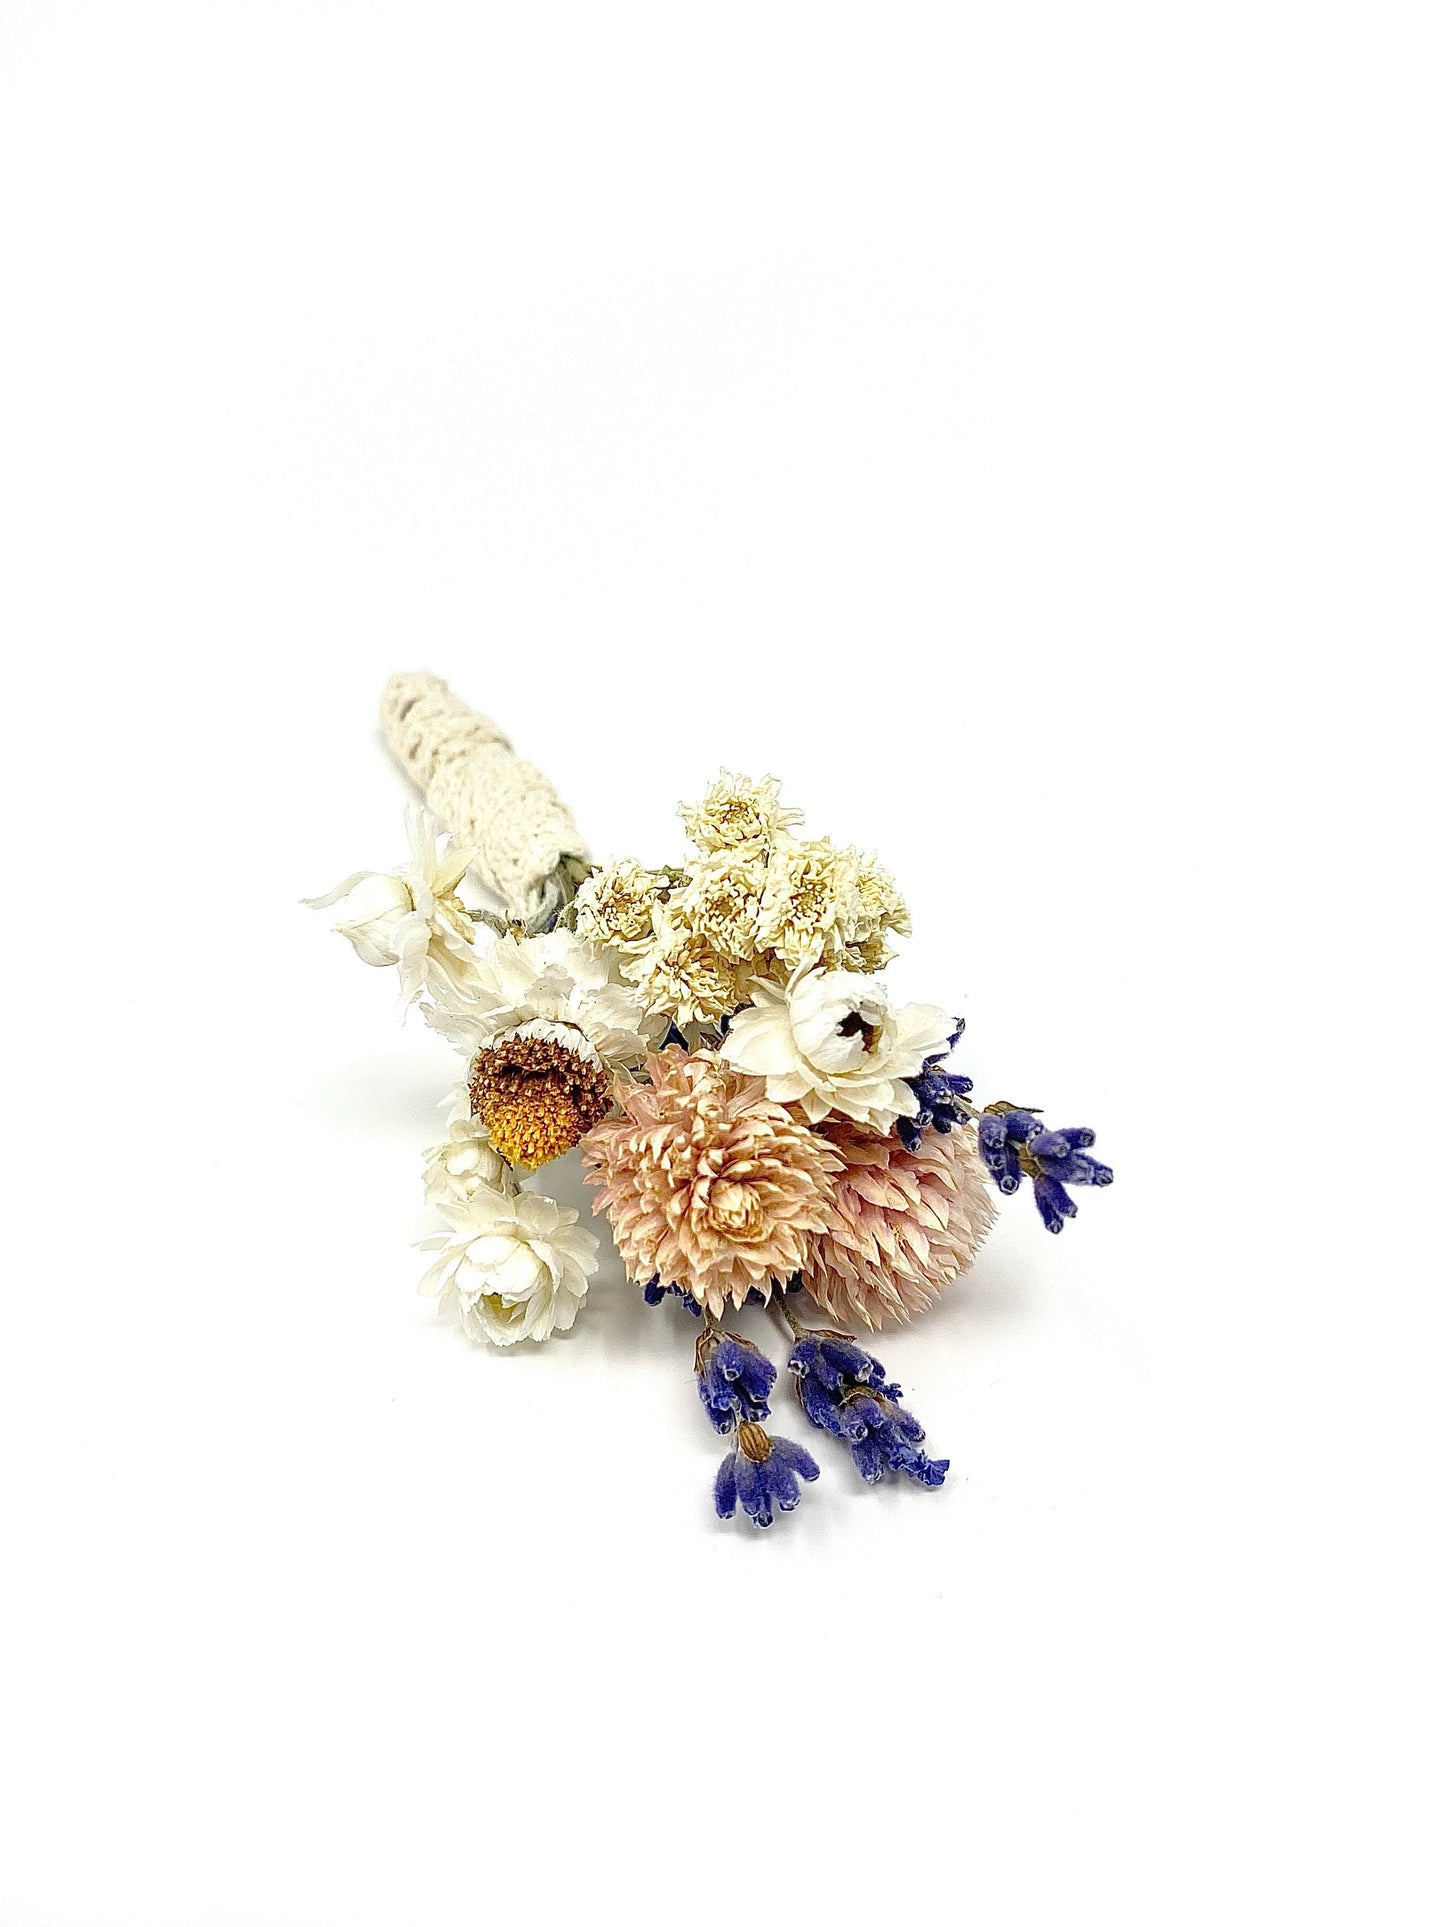 Boutonniere, Wedding Accessories, Dried Flowers, Preserved Floral, Bridal, Decor, Pink and Purple, Ammobium, Lavender